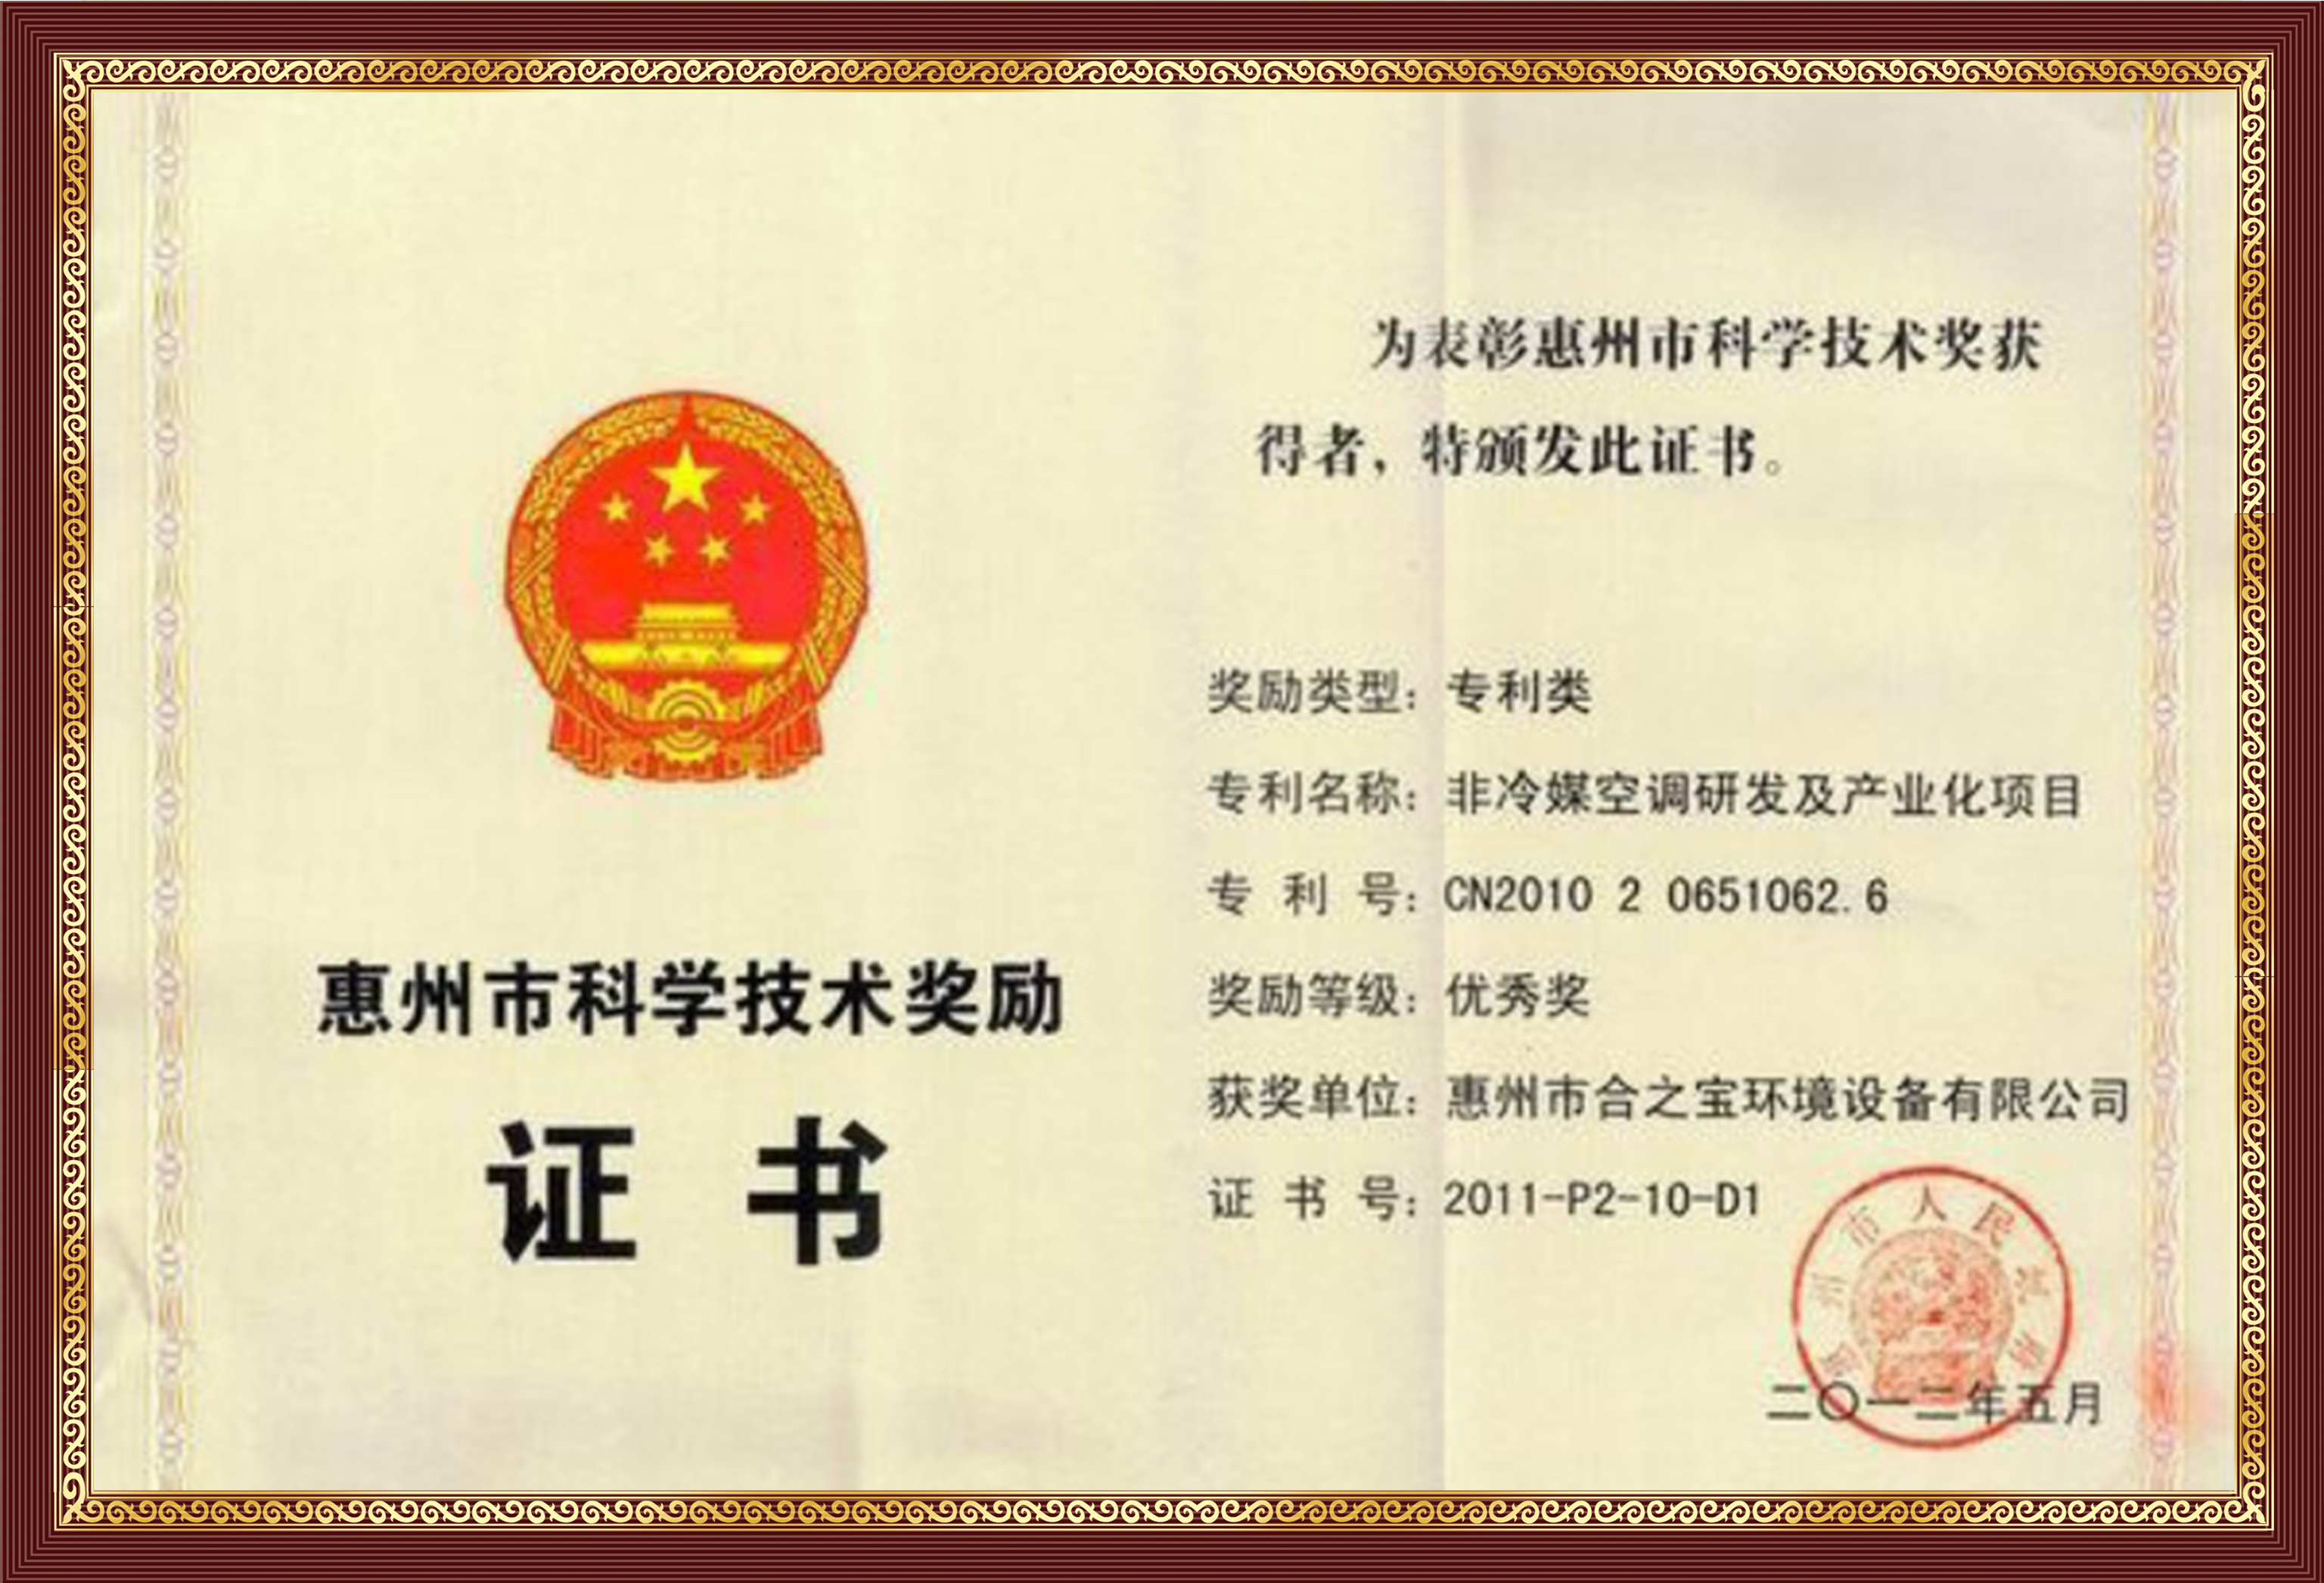 Award of Excellent Patent of Huizhou City